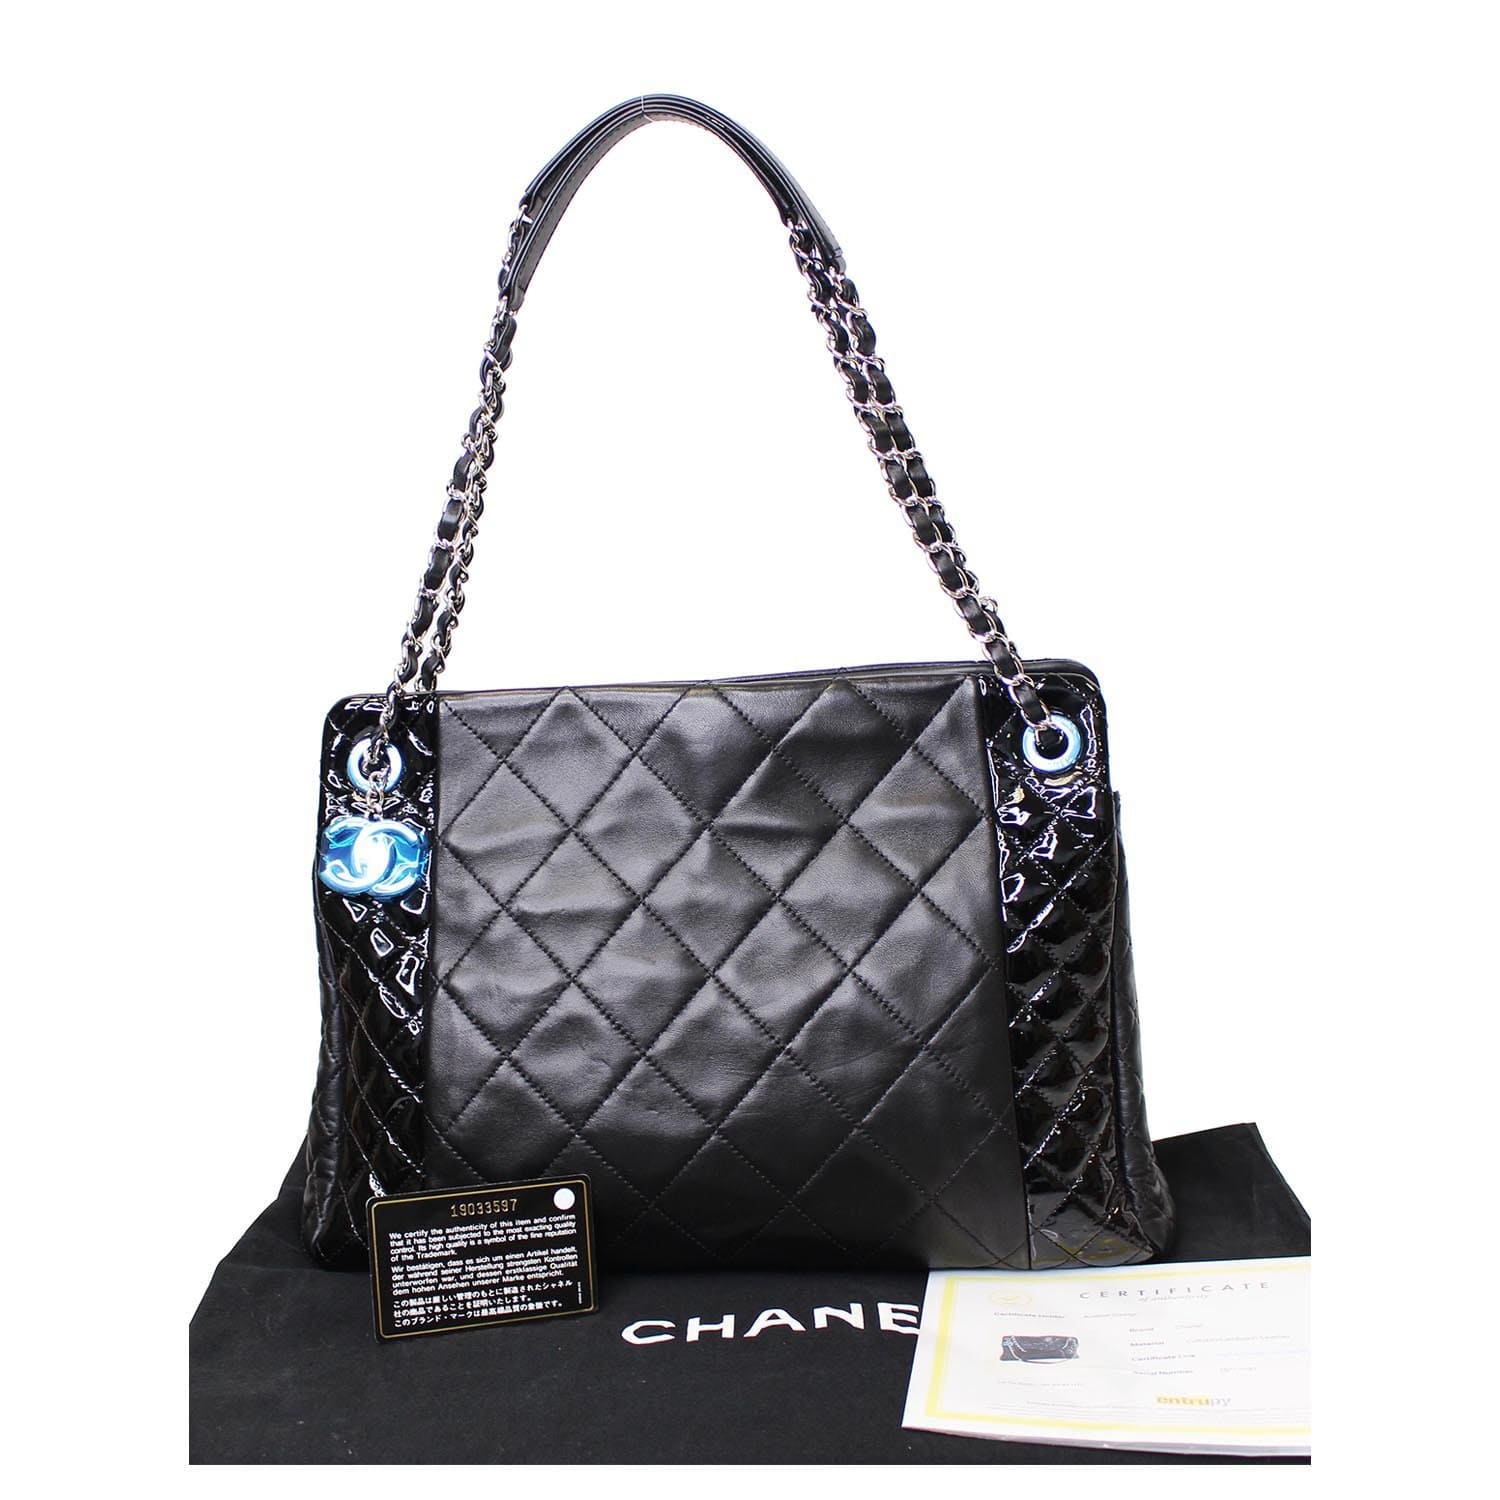 Authentic Chanel Black Quilted Patent CC Medallion Zip Tote Bag